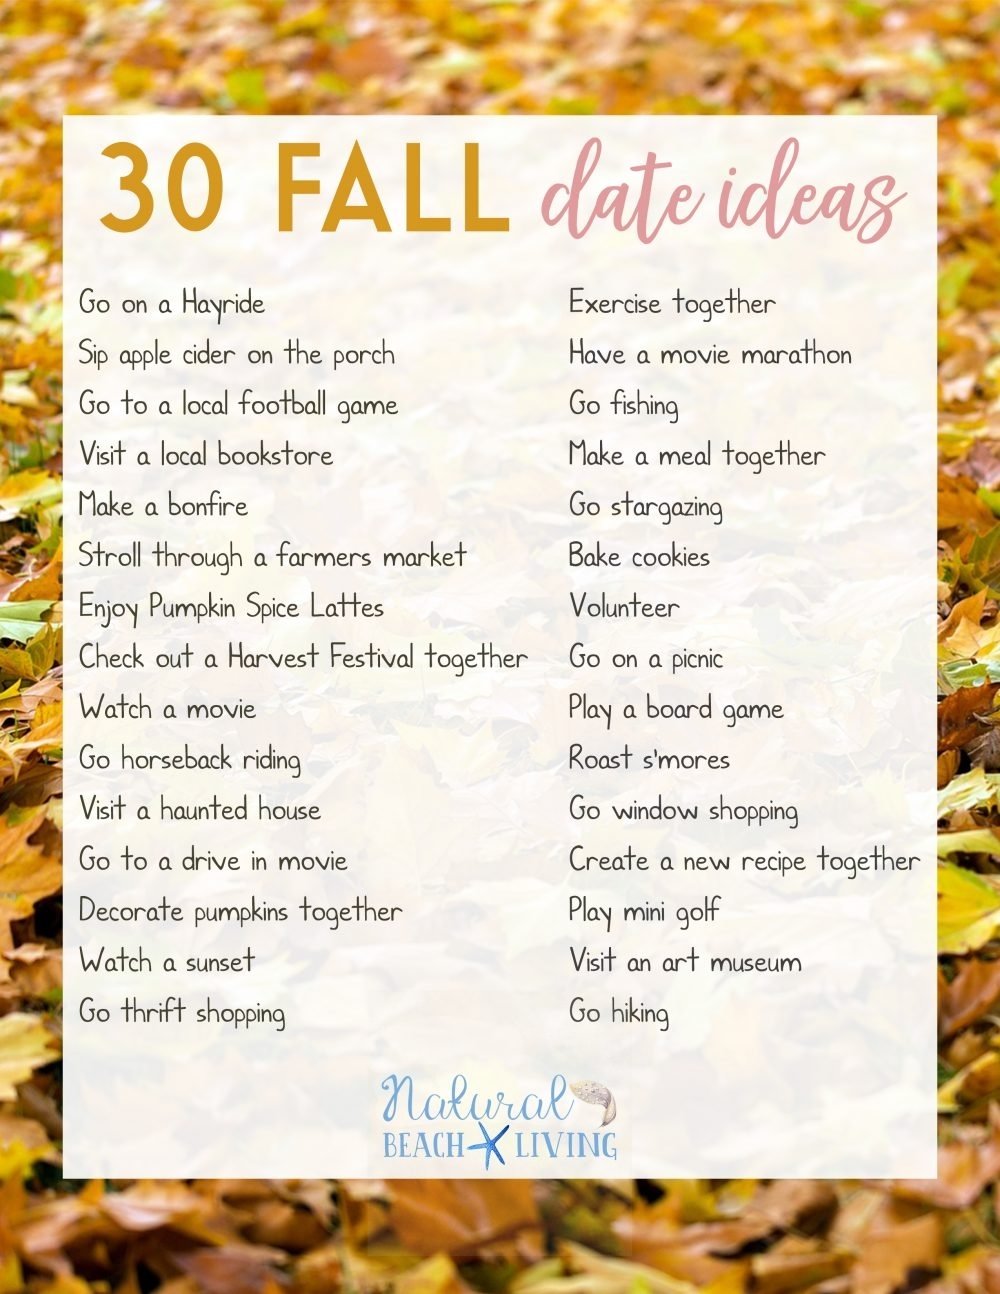 10 Trendy Great Date Ideas For Married Couples fun date night ideas for fall natural beach living 7 2023